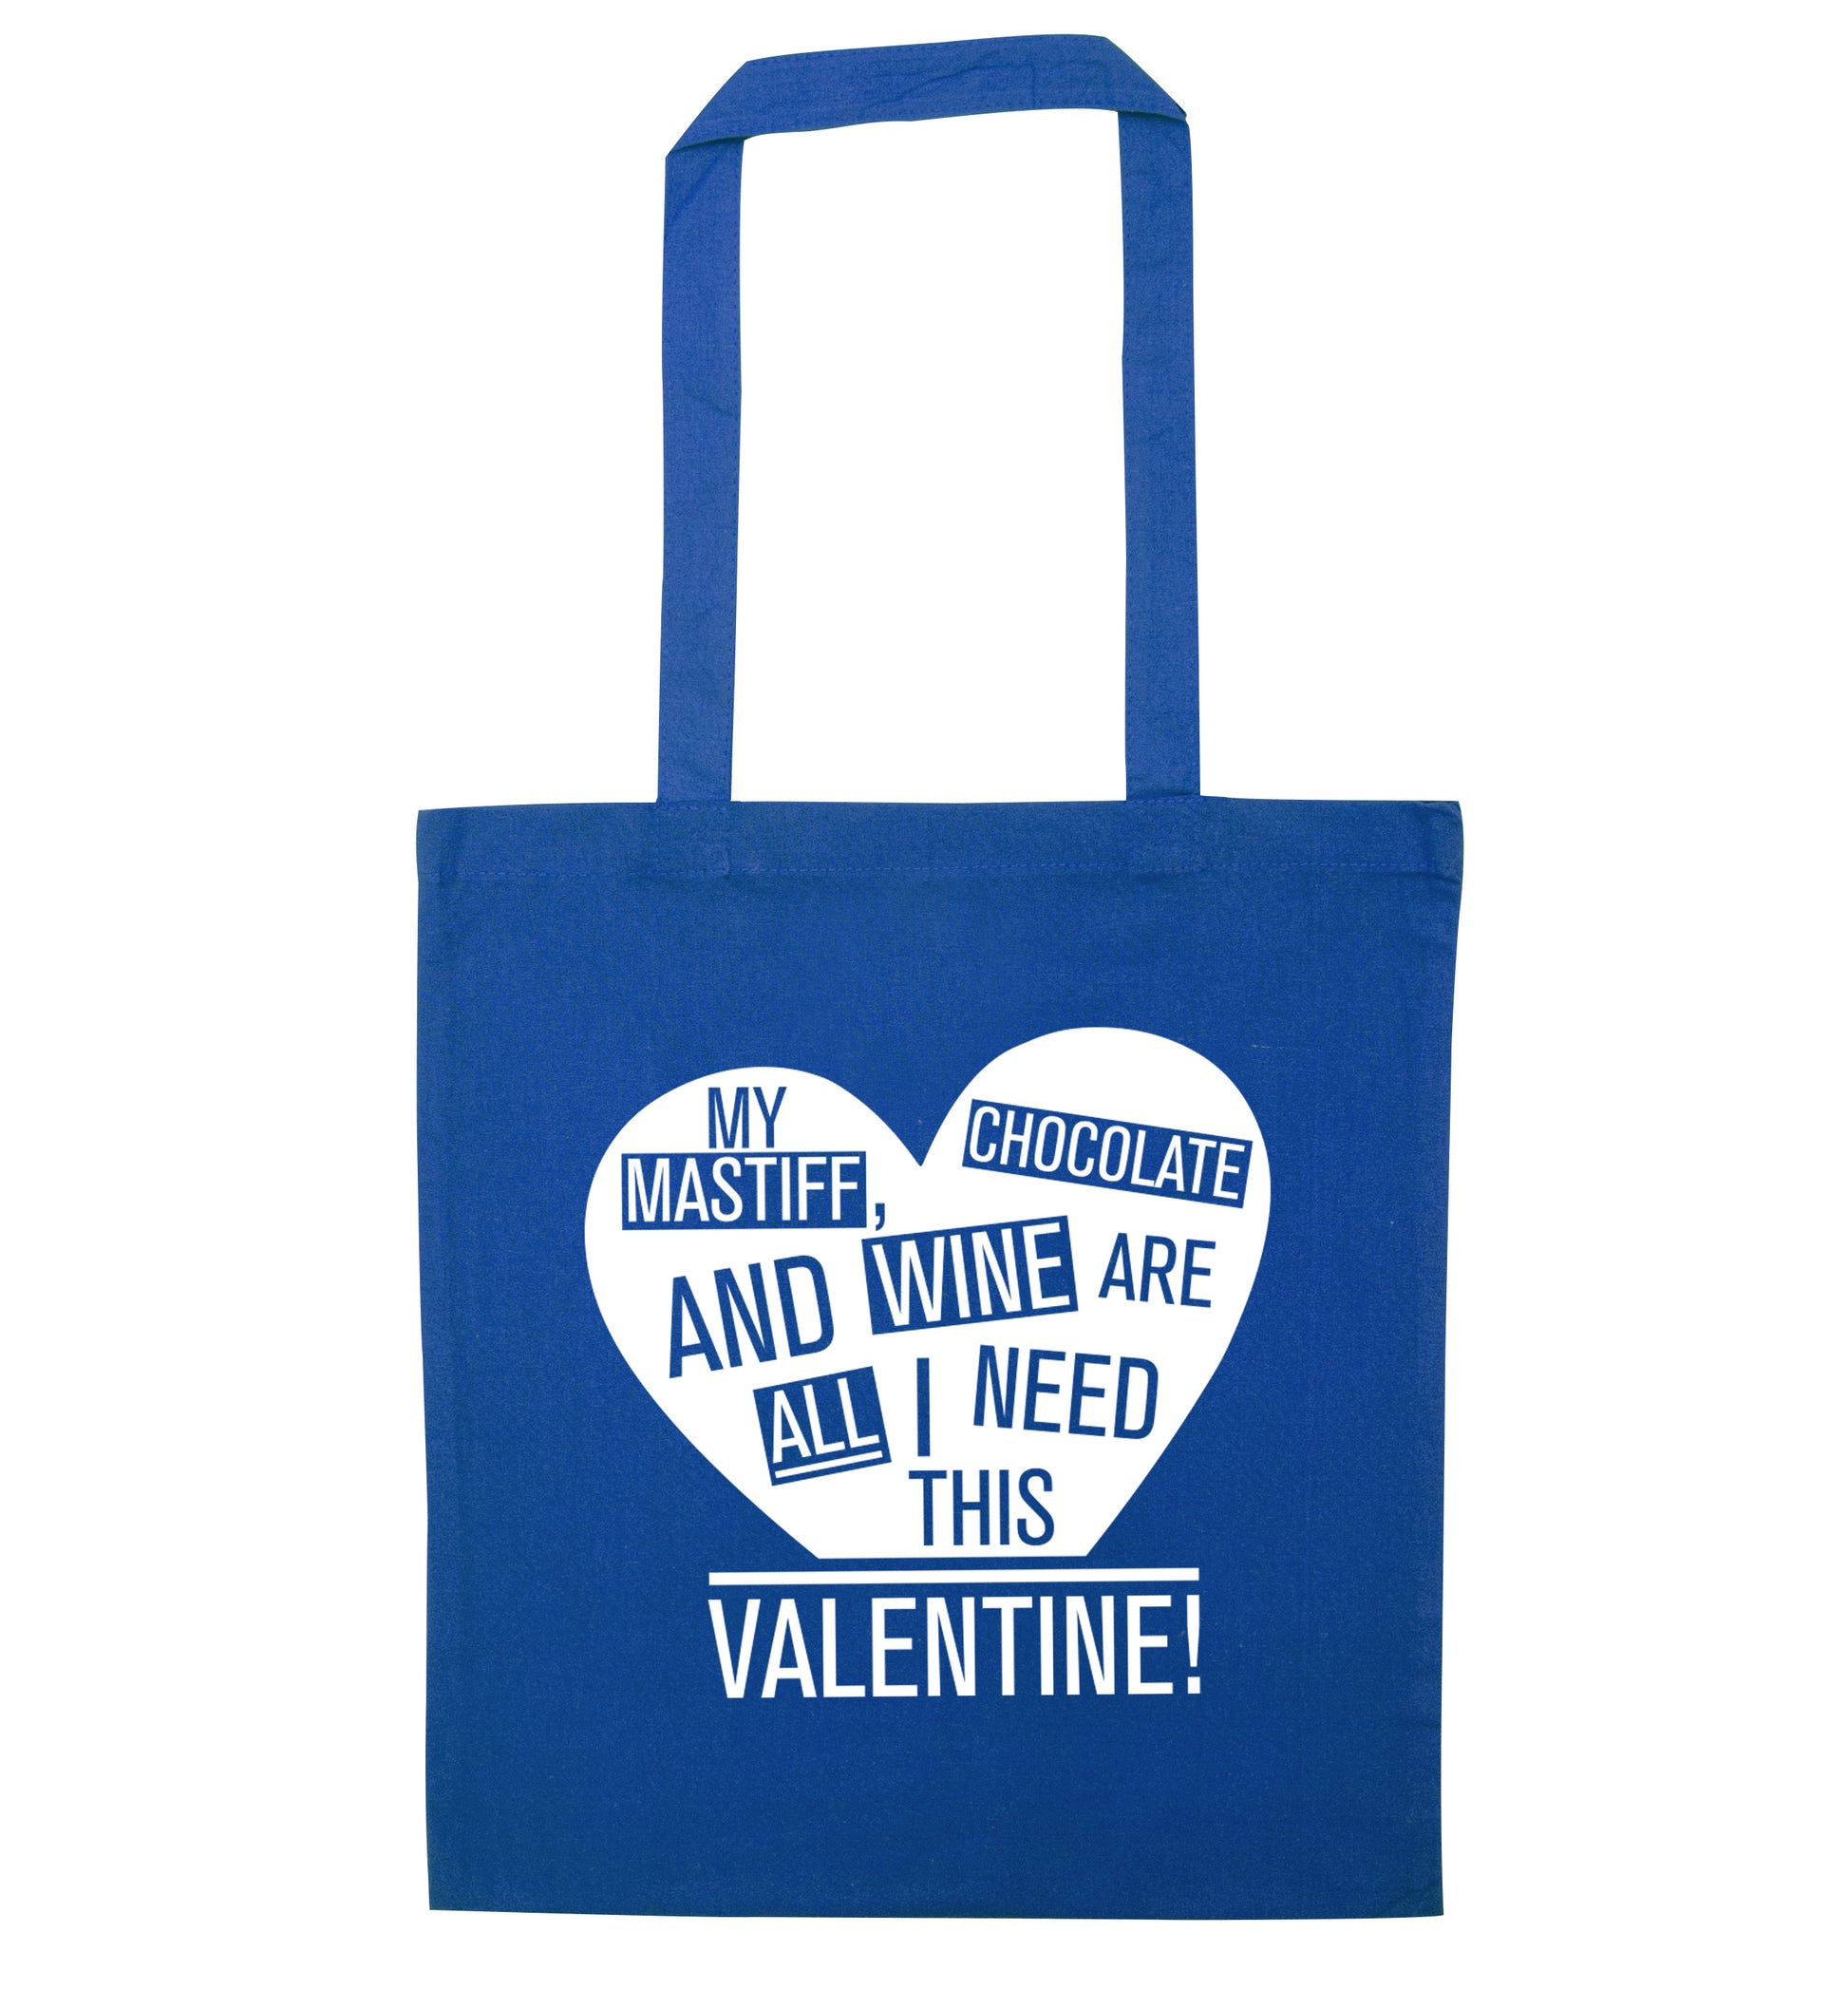 My mastiff, chocolate and wine are all I need this valentine! blue tote bag